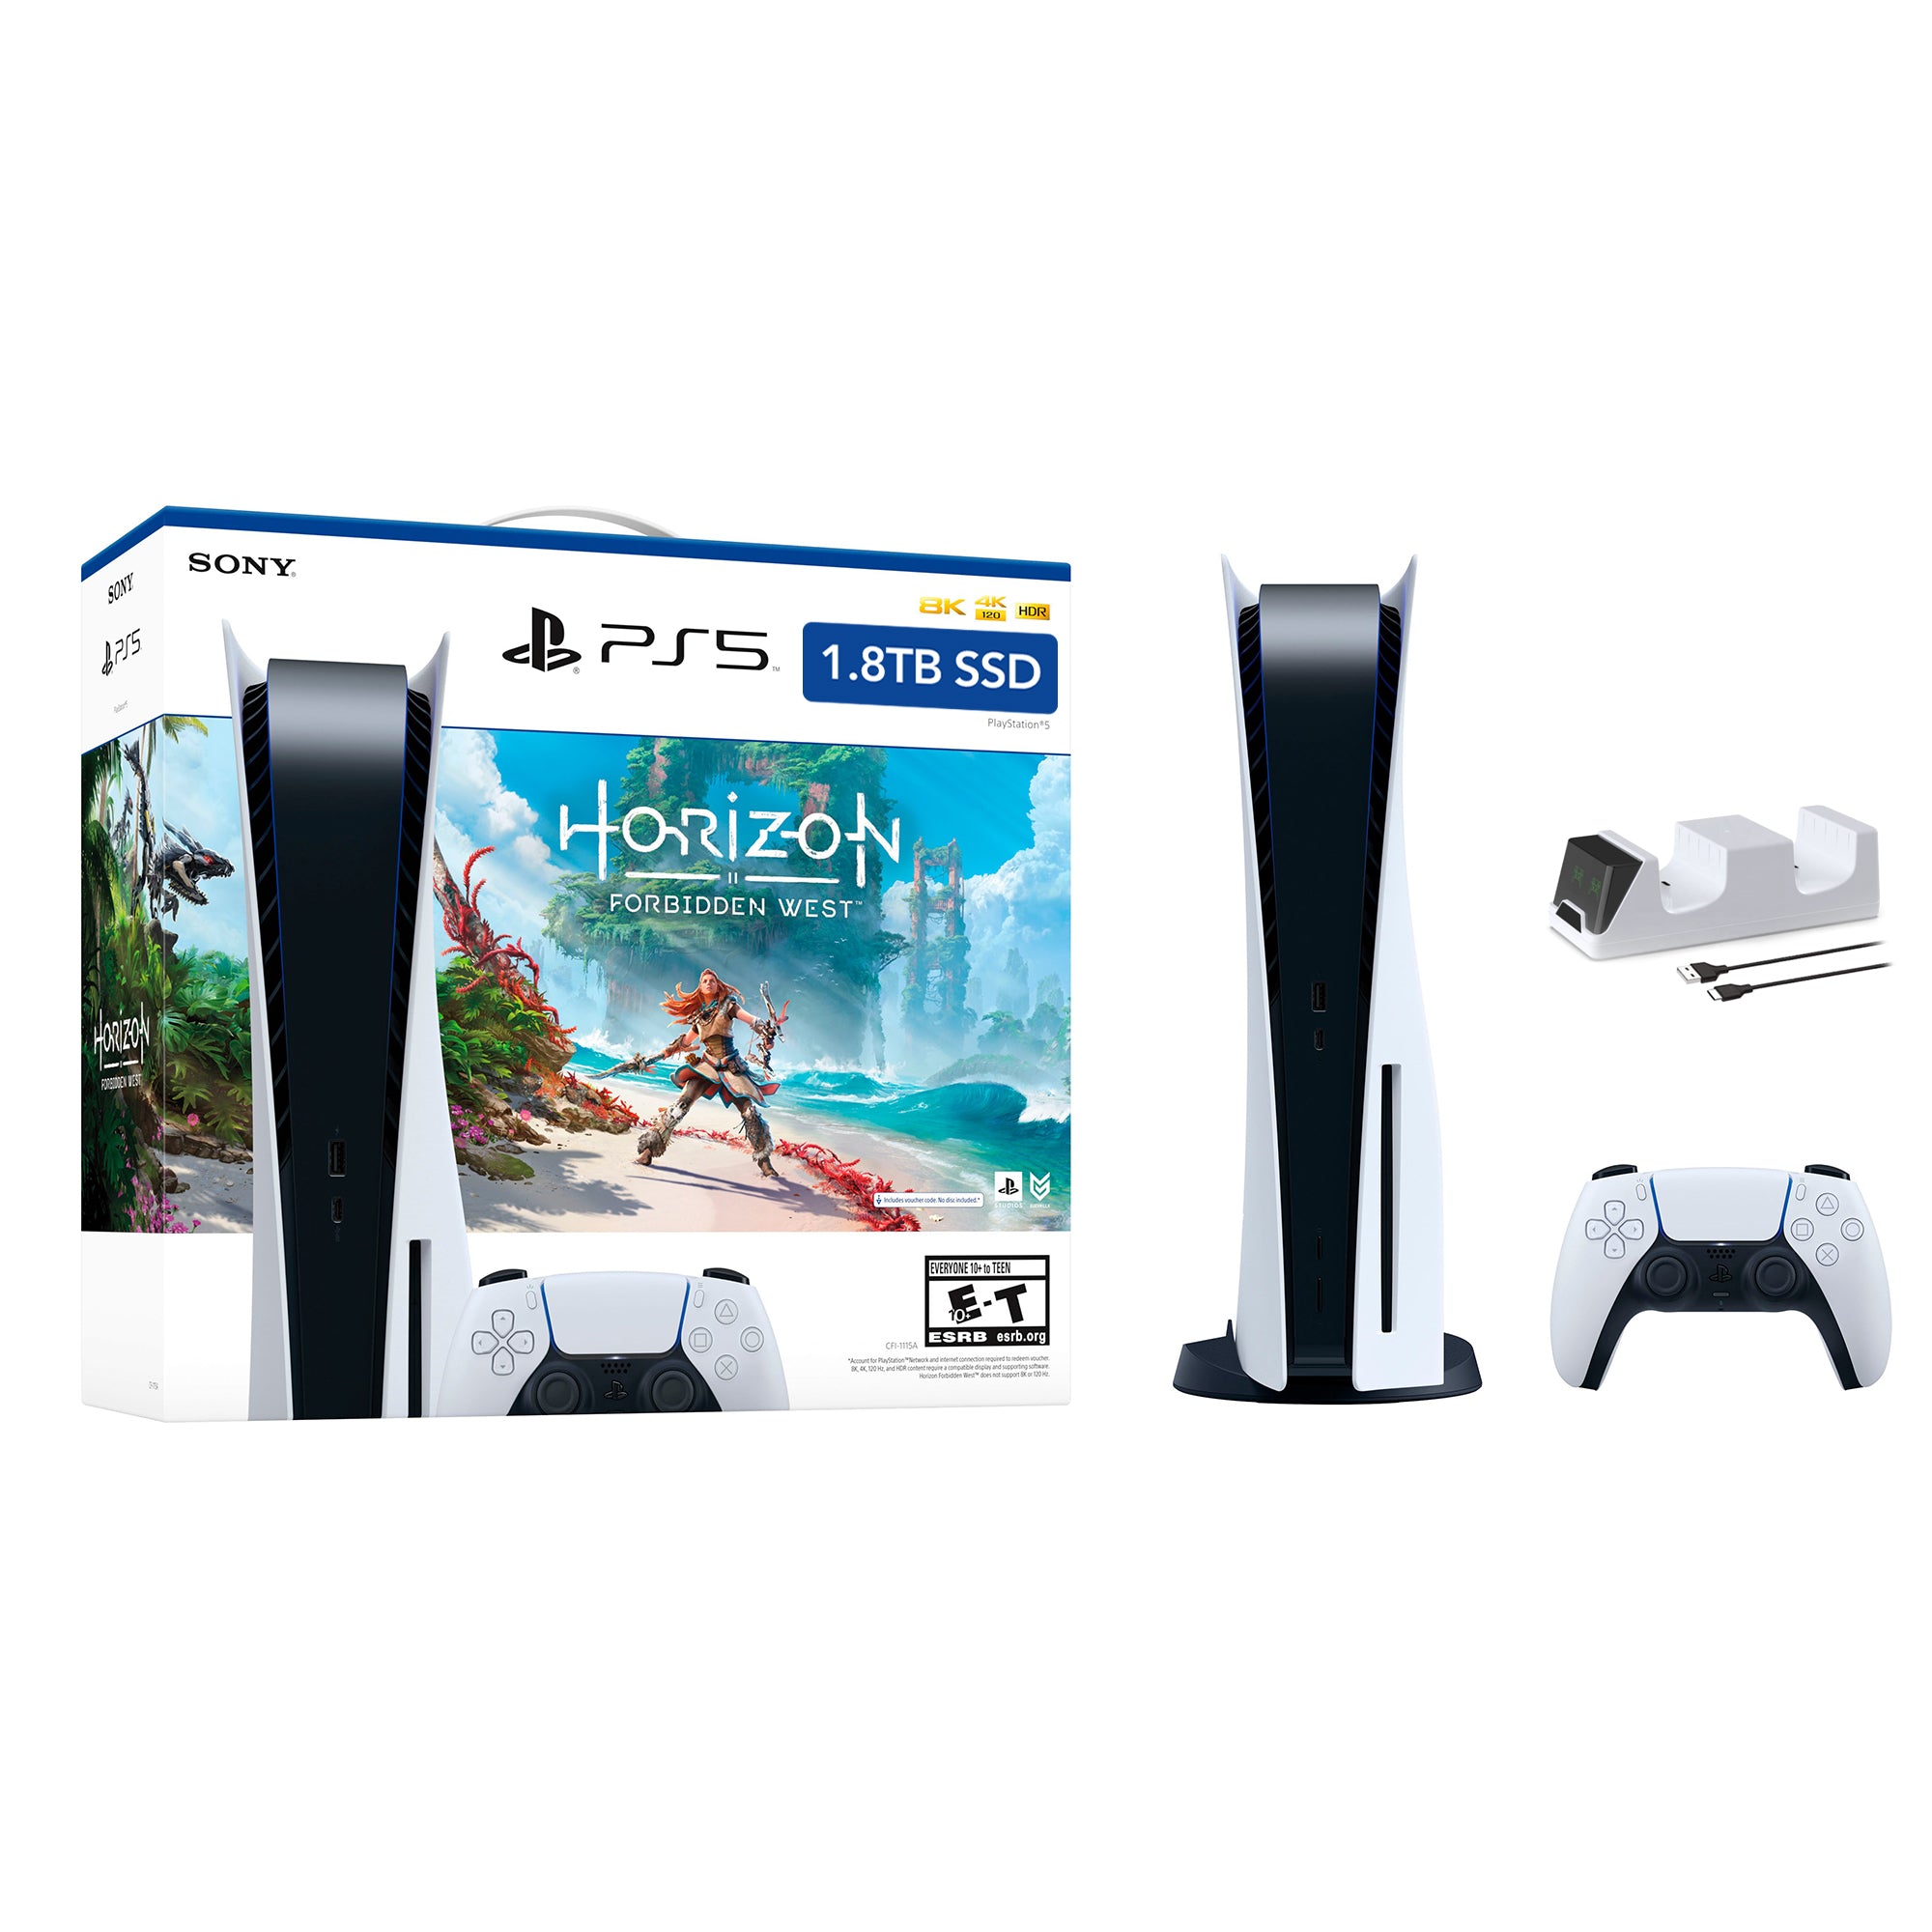 PlayStation 5 Upgraded 1.8TB Disc Edition Horizon Forbidden West Bundle and Mytrix Controller Charger - White, PS5 Gaming Console